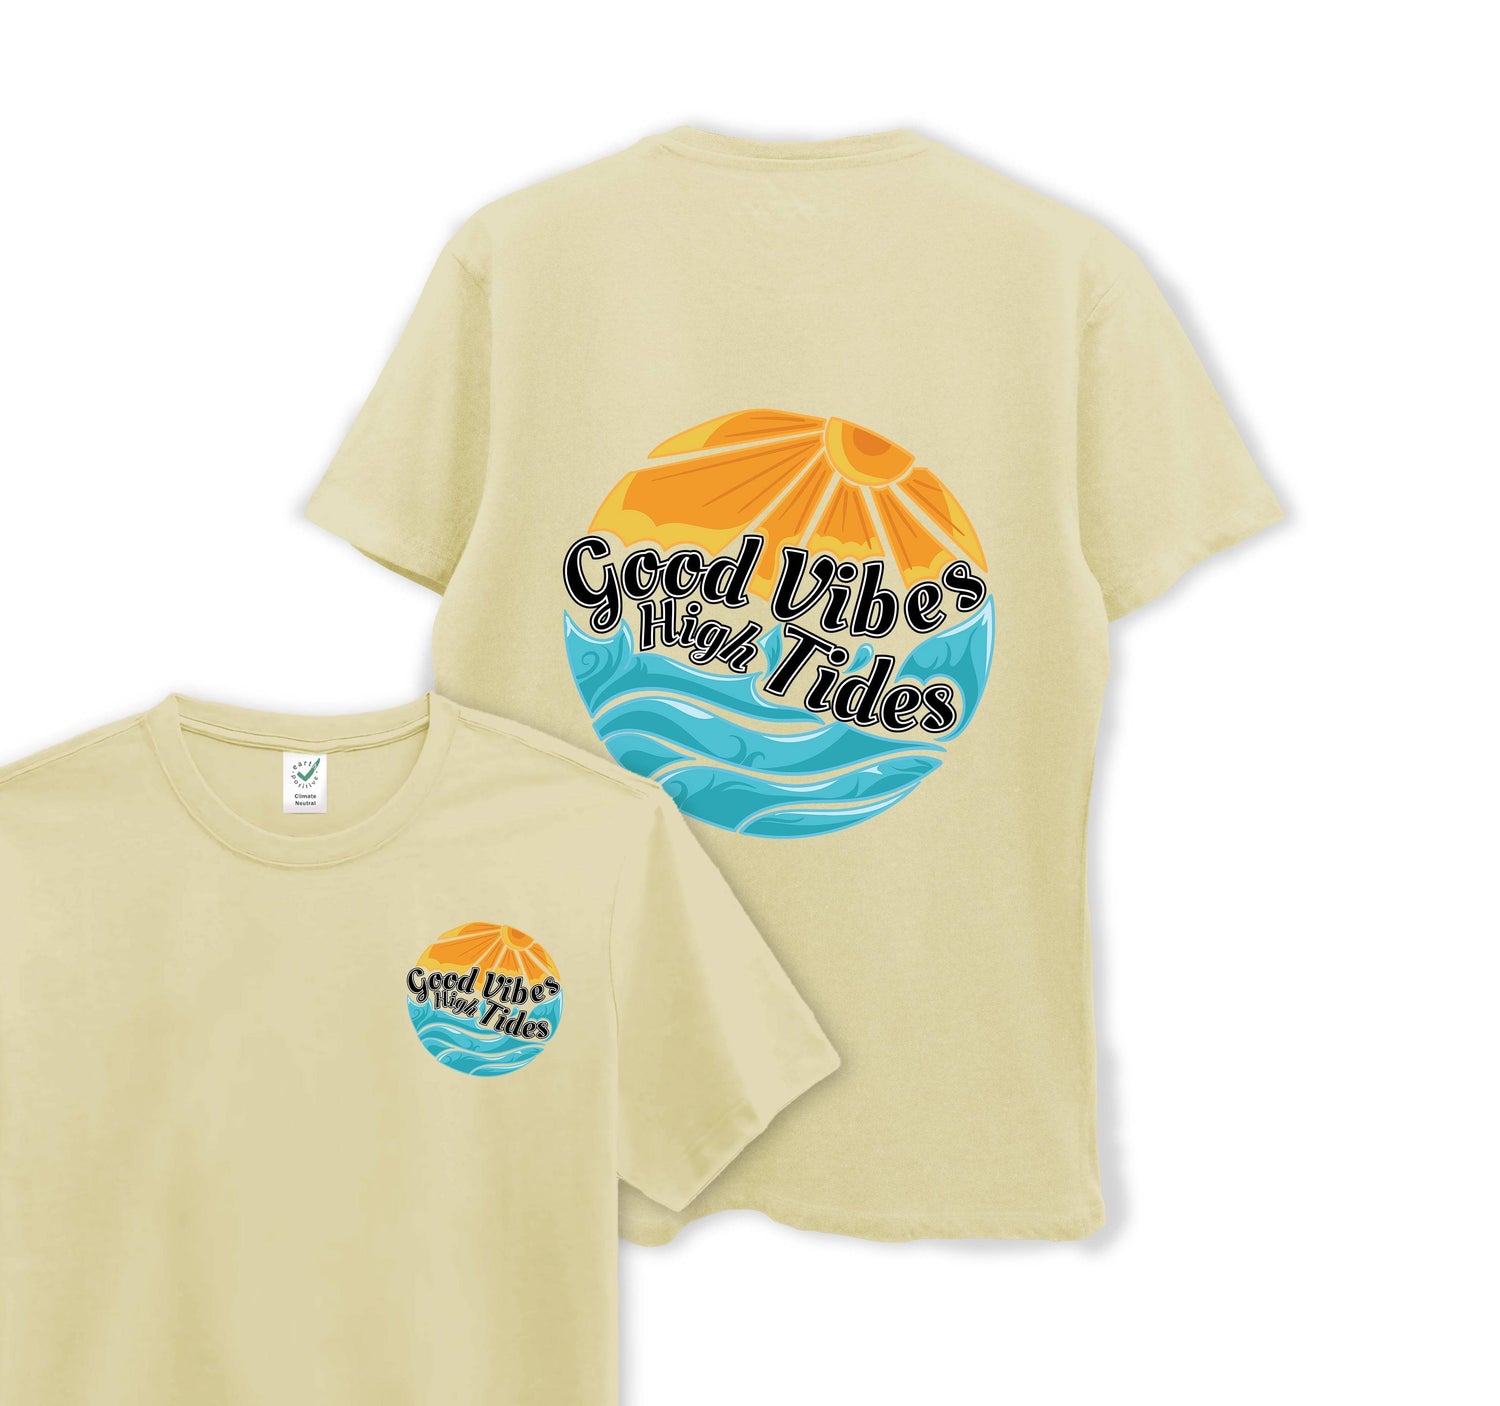 Good Vibes With High Tides - Organic Cotton Tee - One Choice Apparel